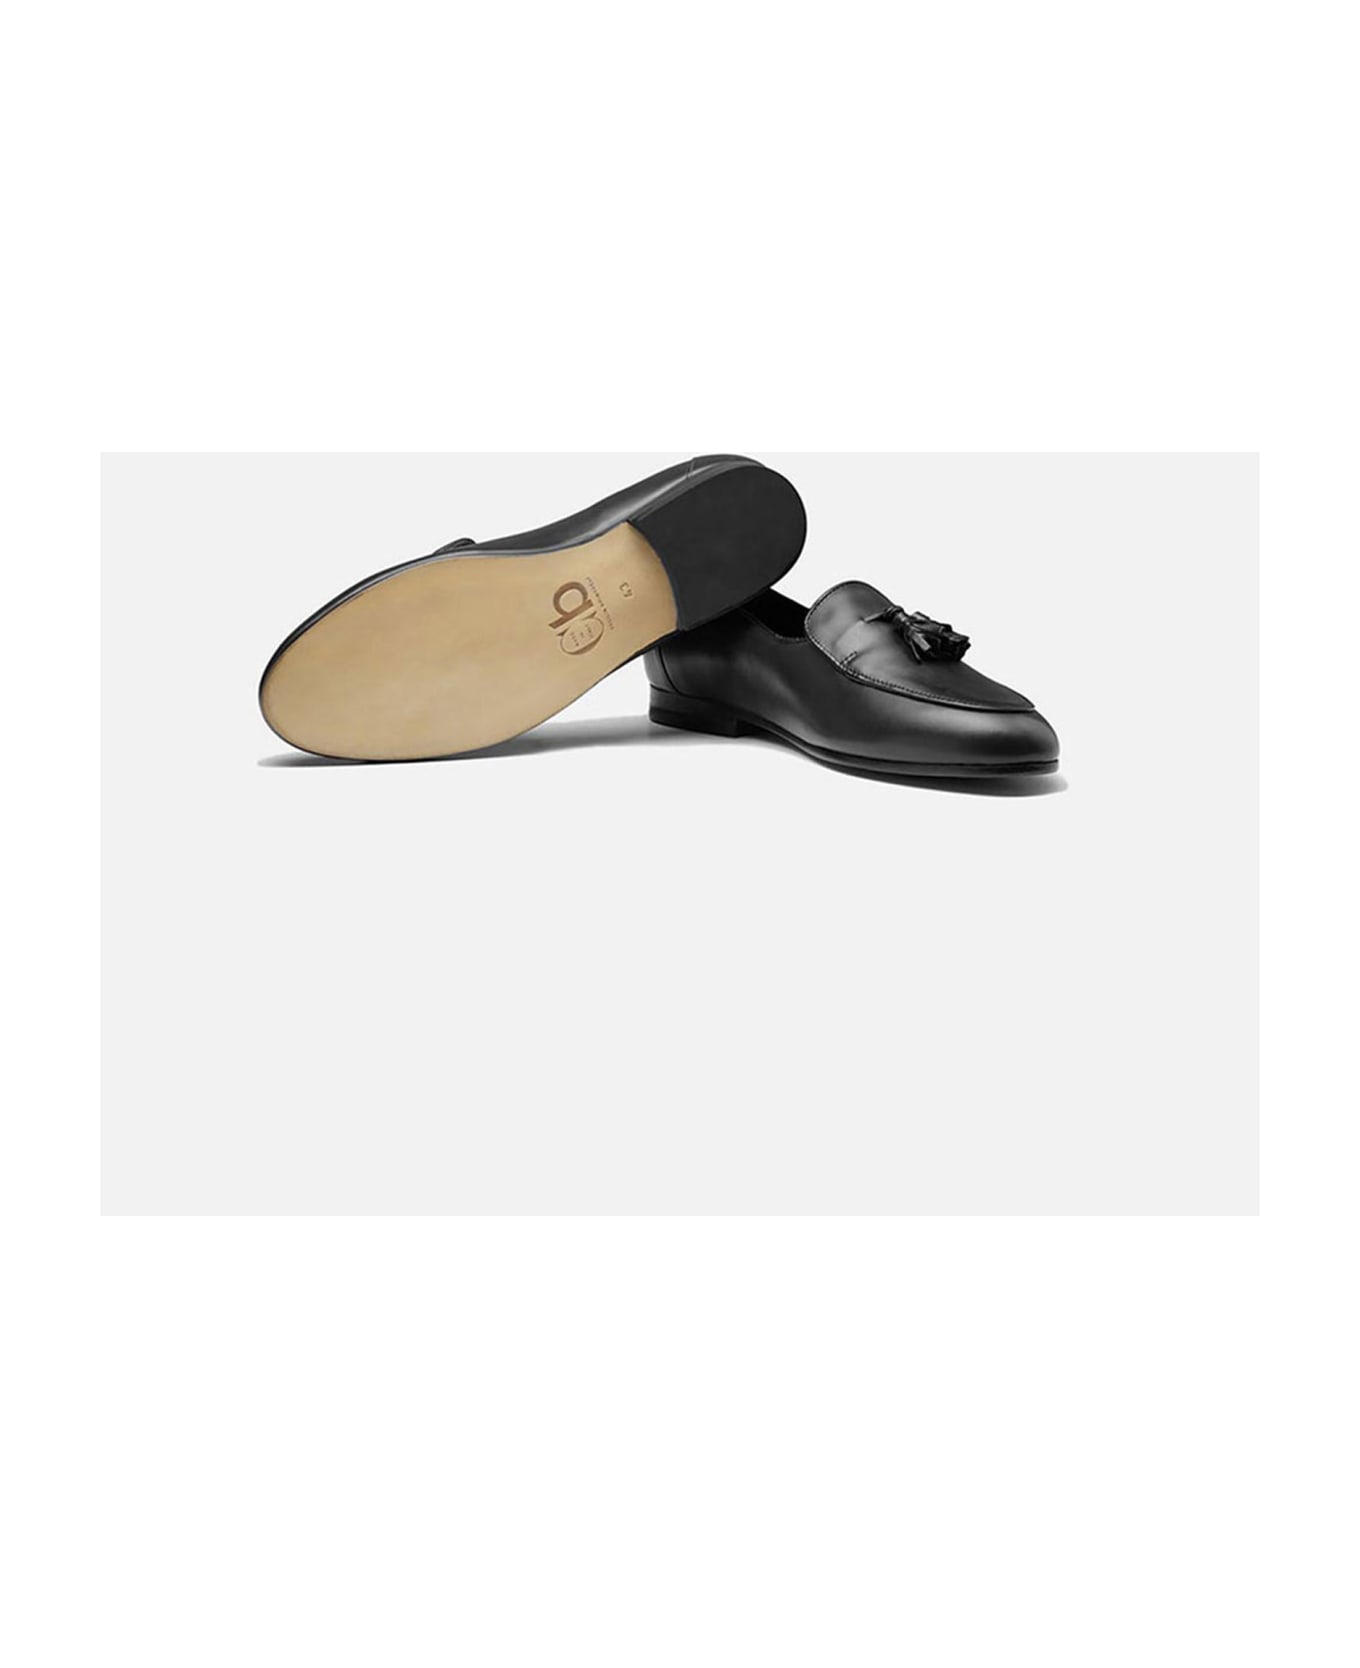 CB Made in Italy Leather Slip-on Nerano - Black